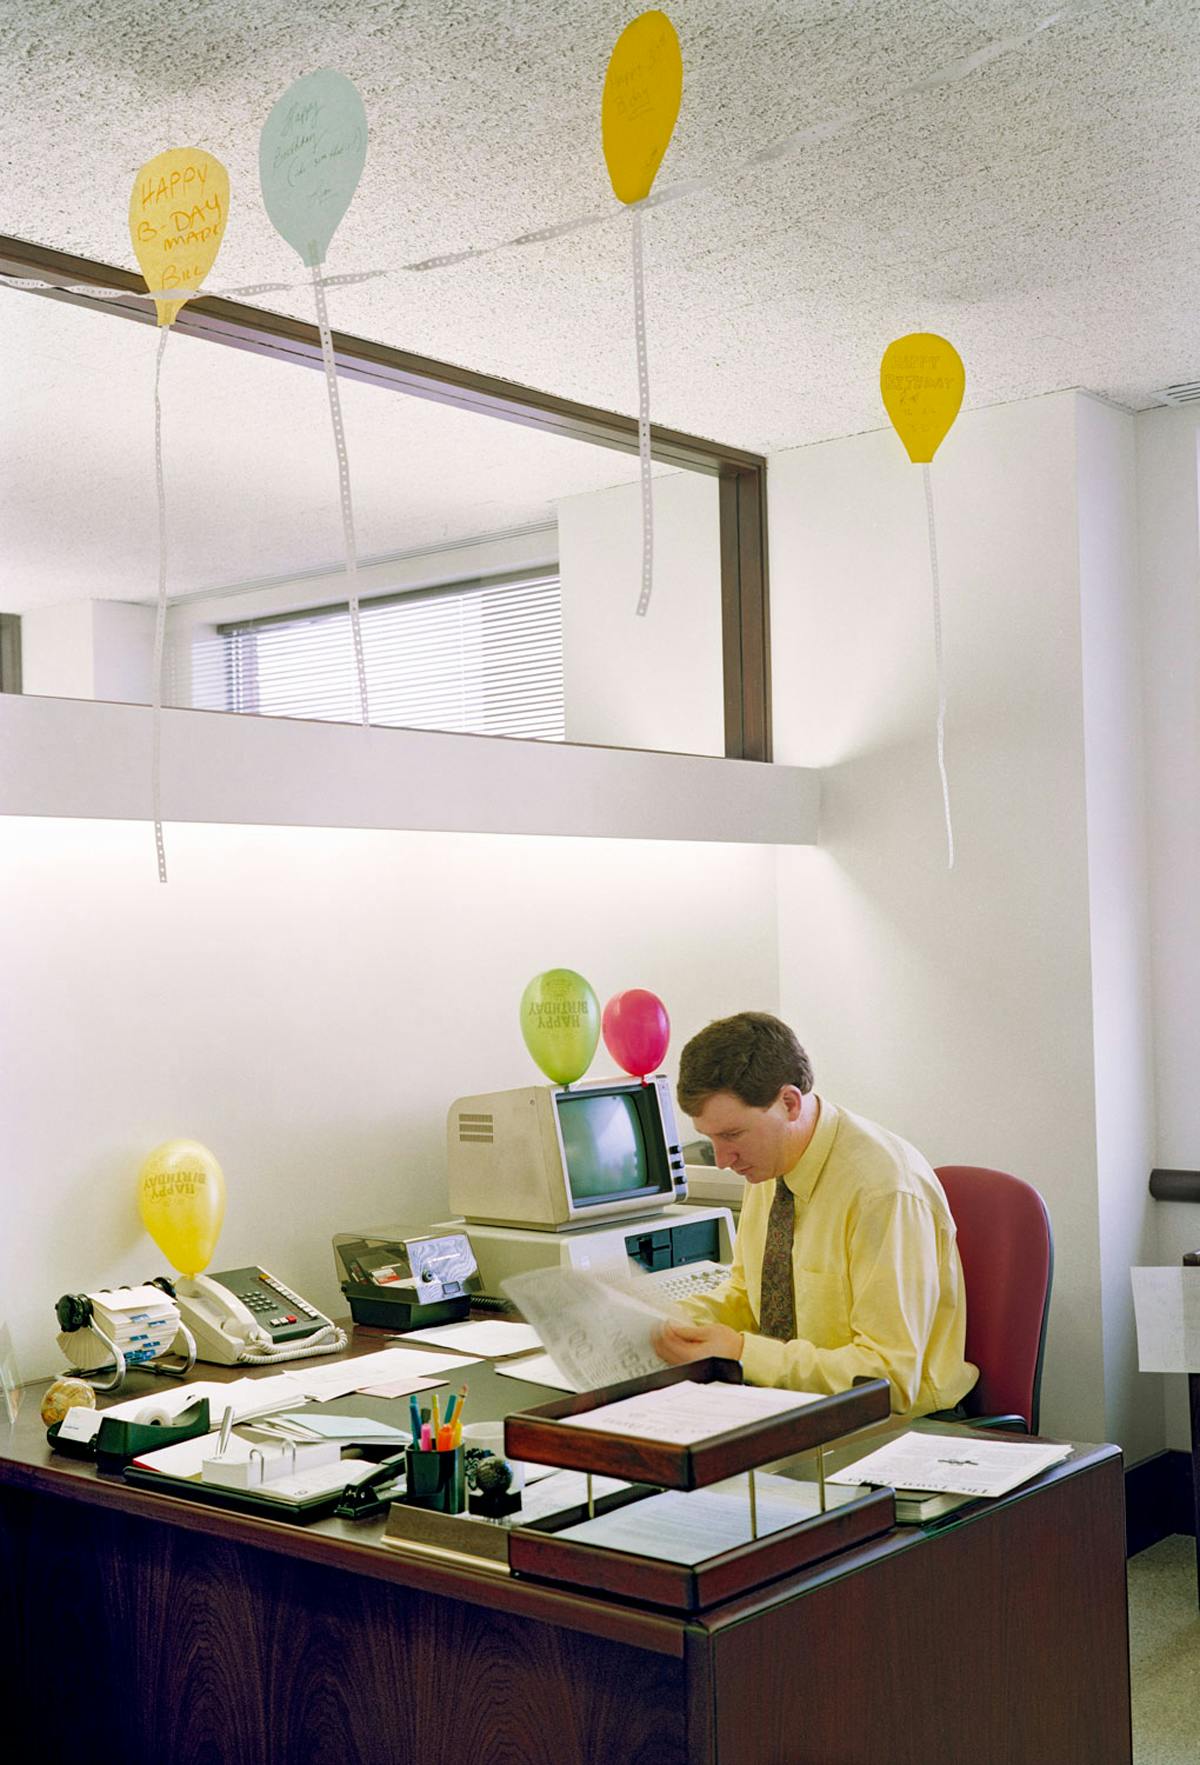 A new photo book remembers the bygone era of the office